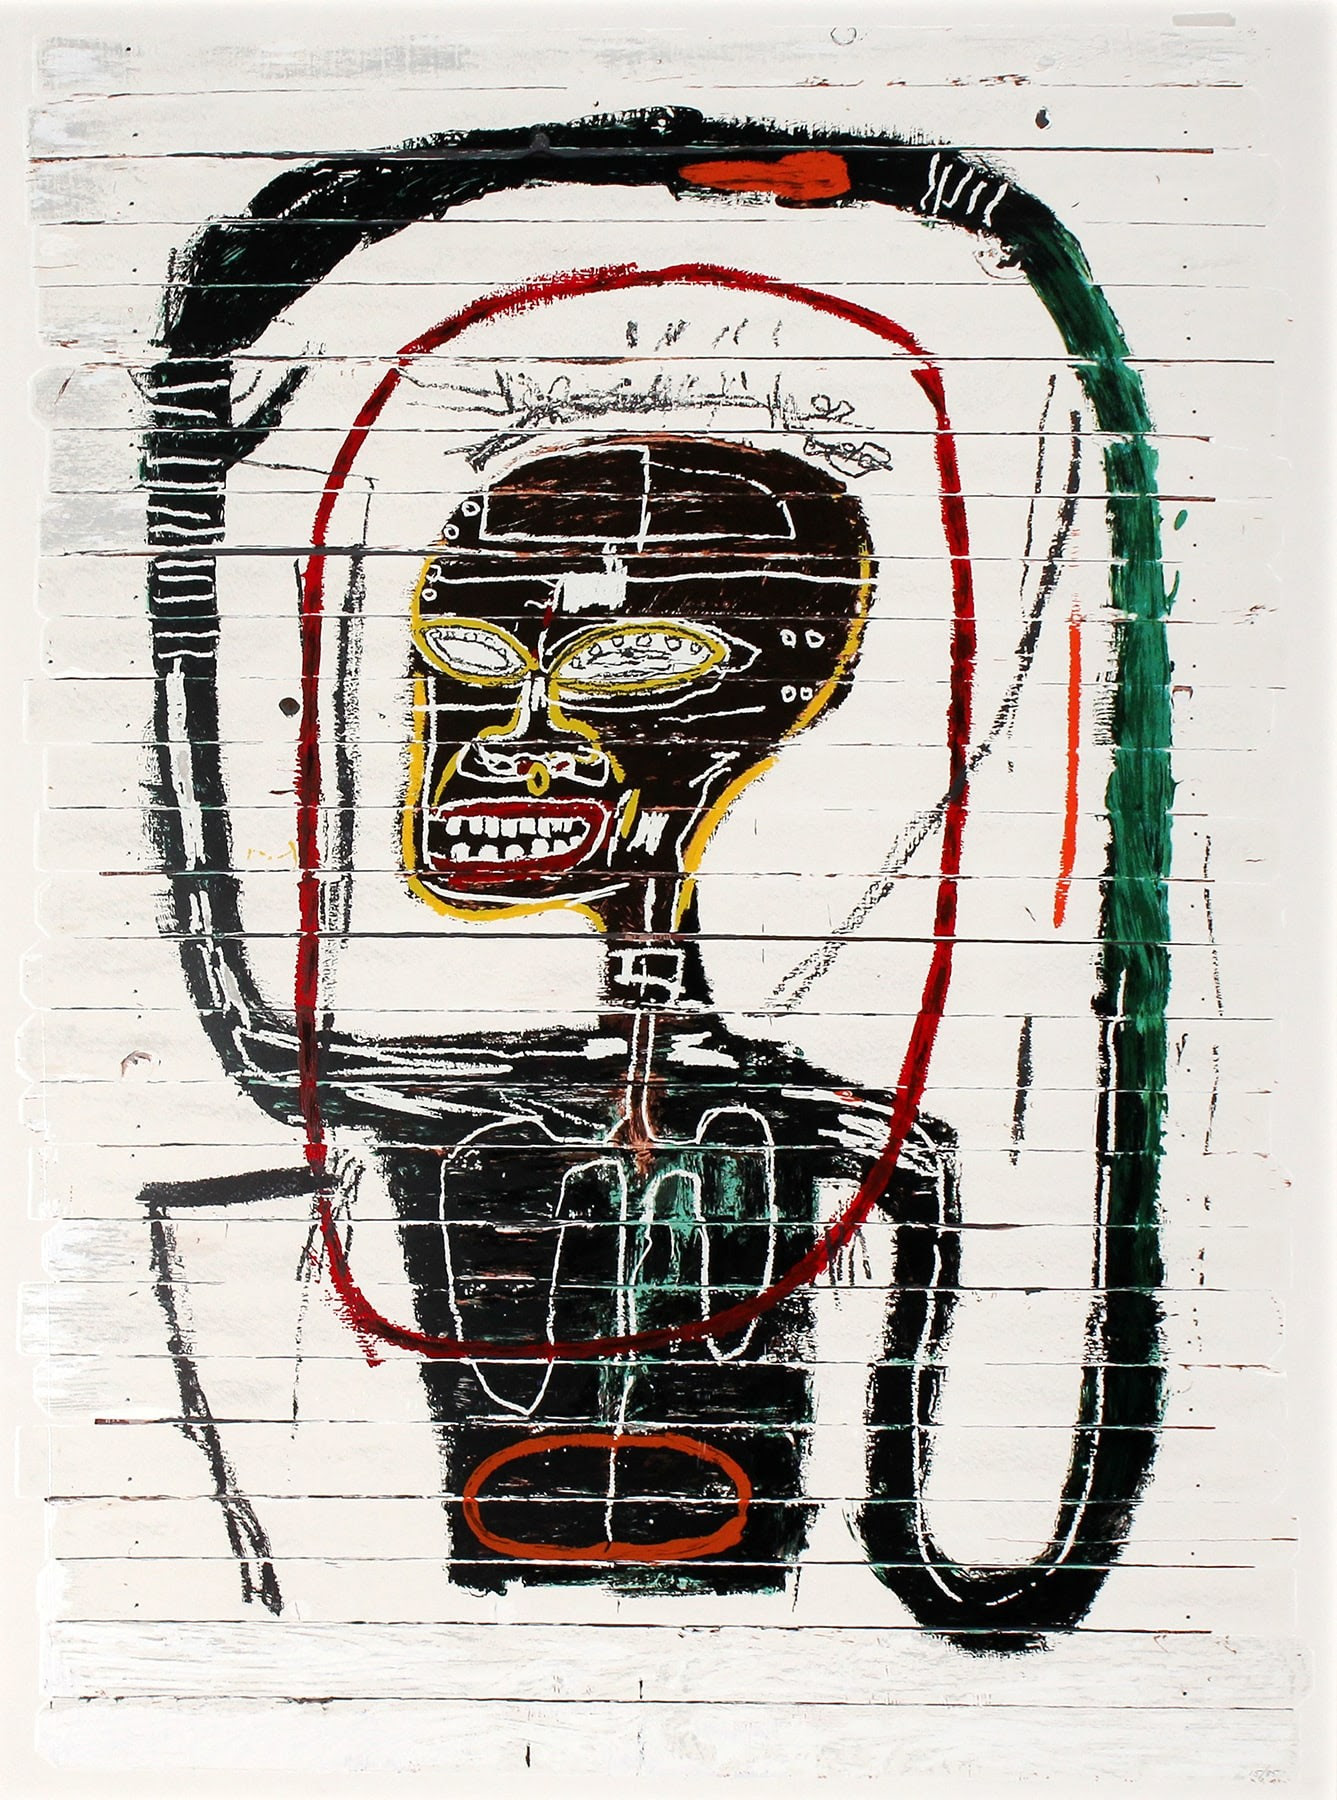 Should you invest in Basquiat or the Nasdaq?